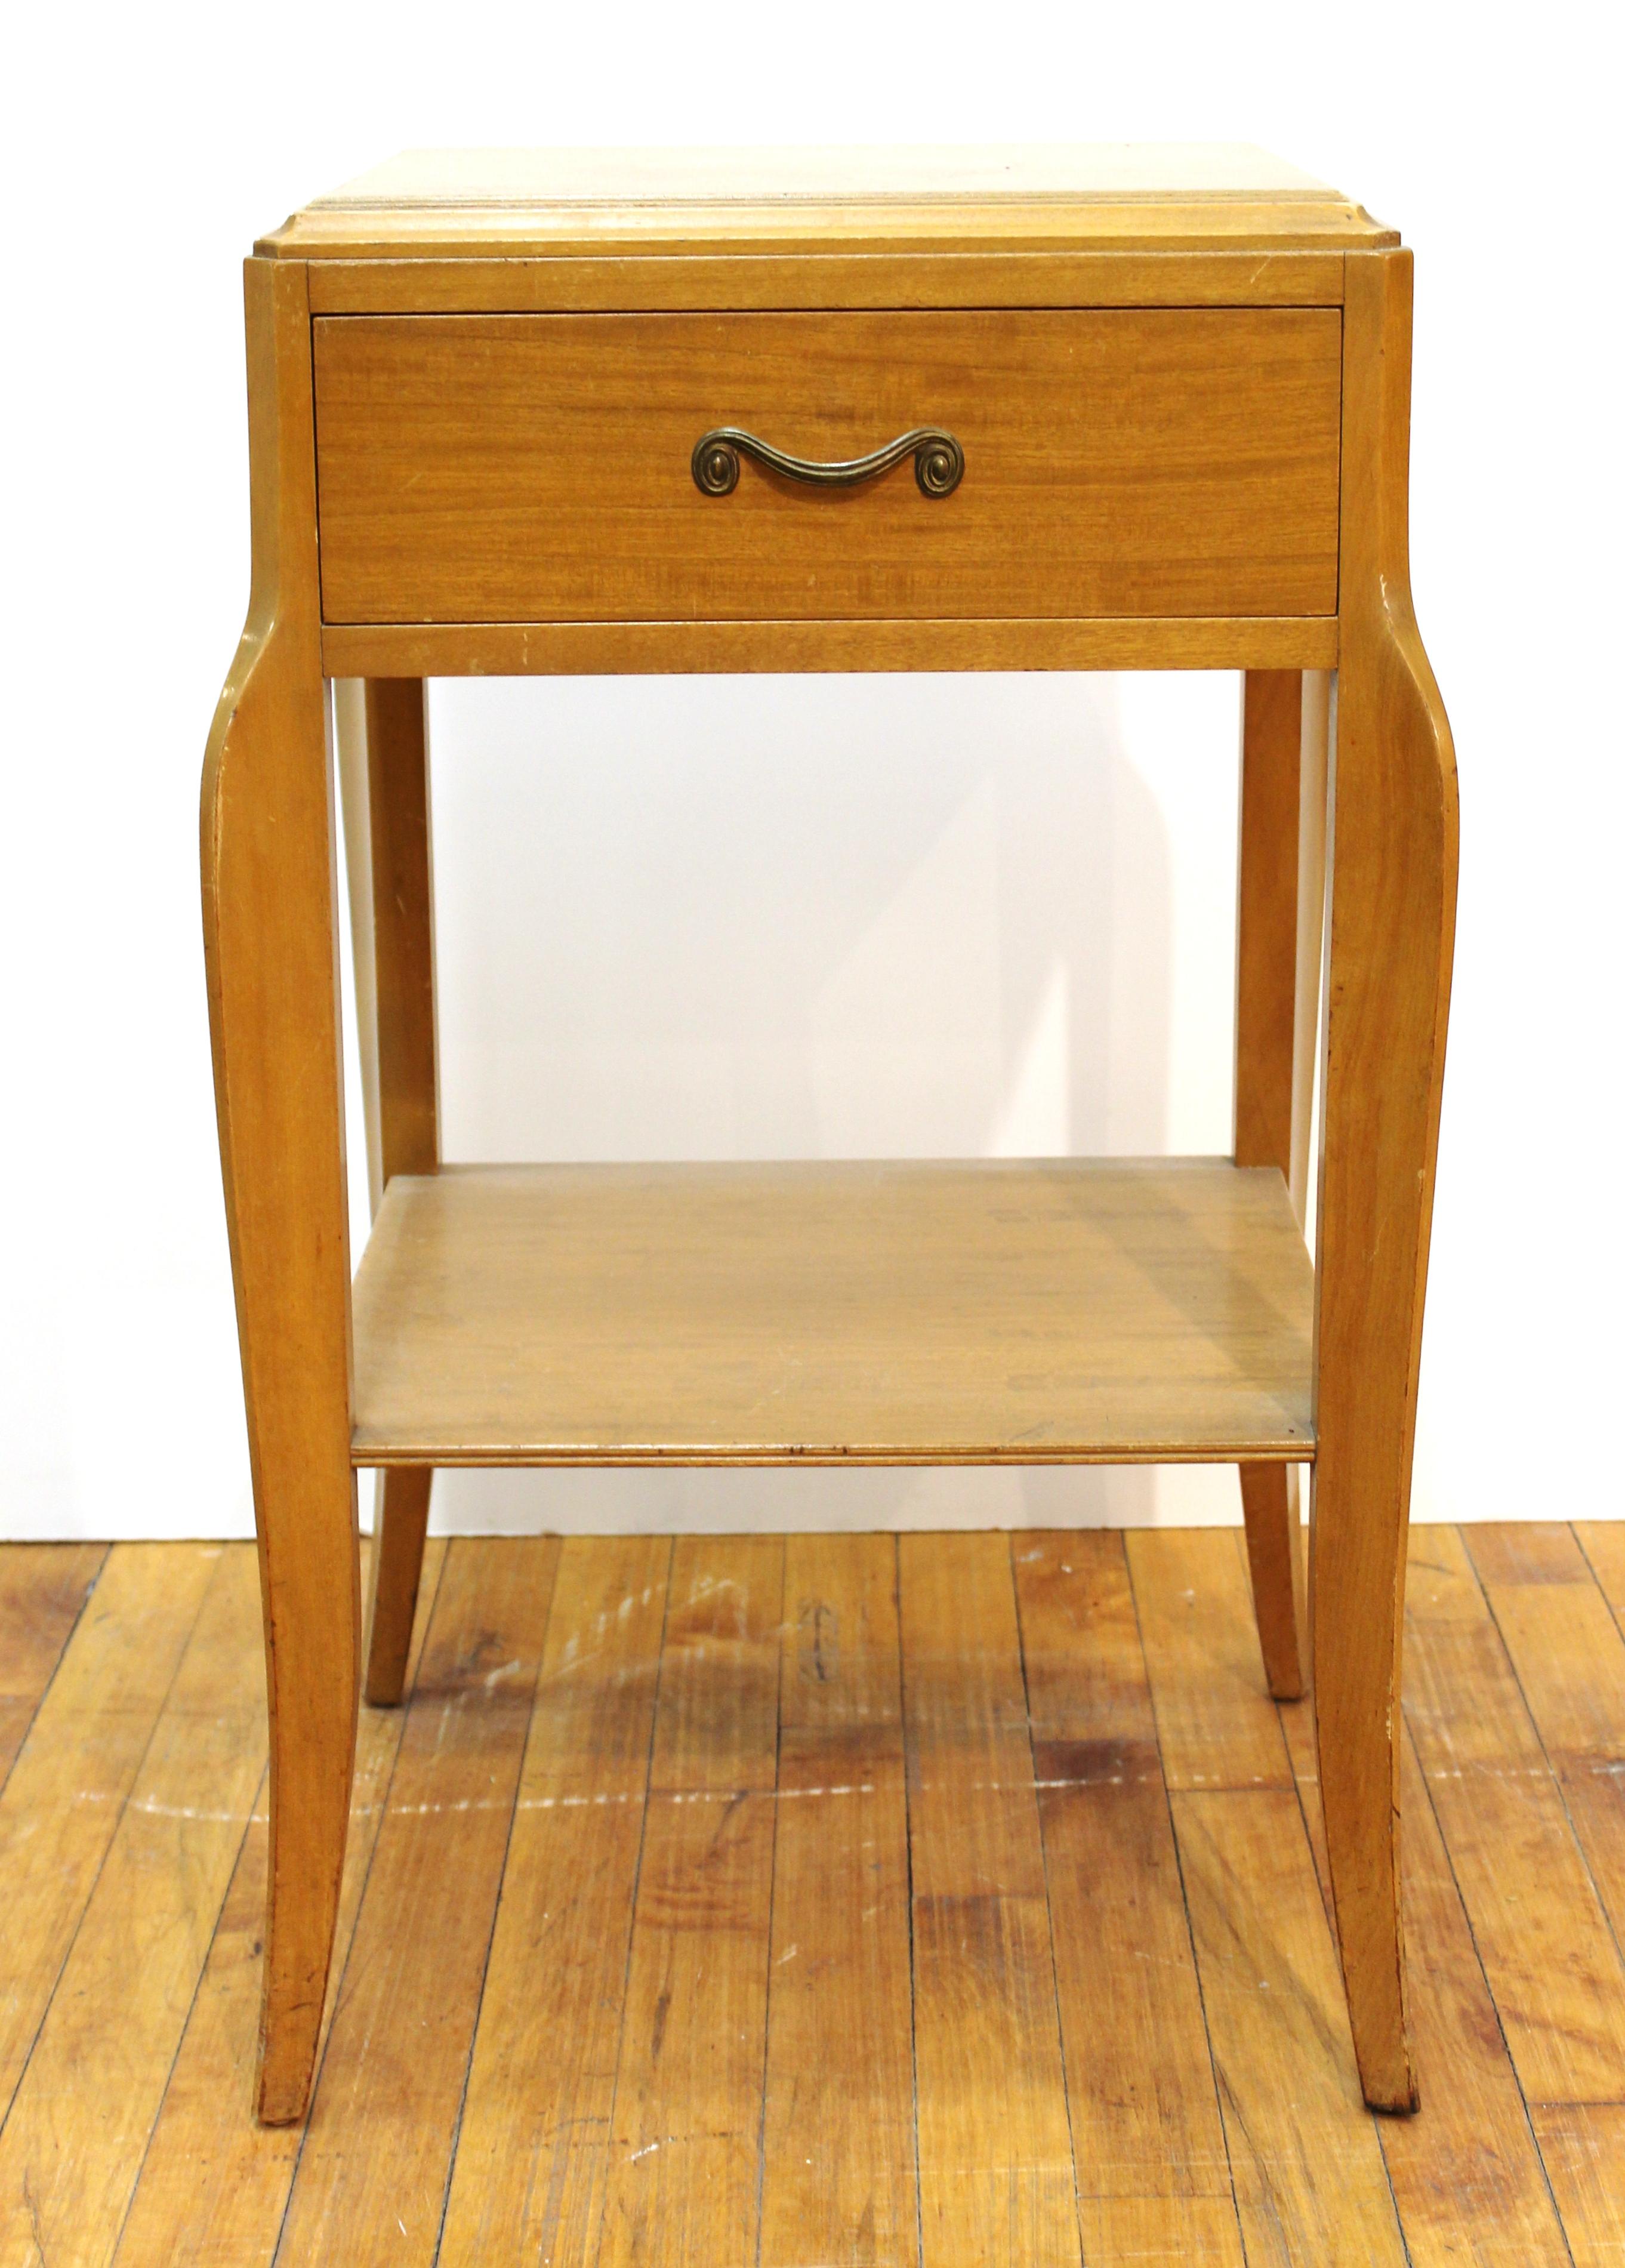 Mid-Century Modern blonde wood nightstand or end table by Northern Furniture Company. The piece has one drawer and lower shelf and is in great vintage condition. Makers plaque inside the drawer.